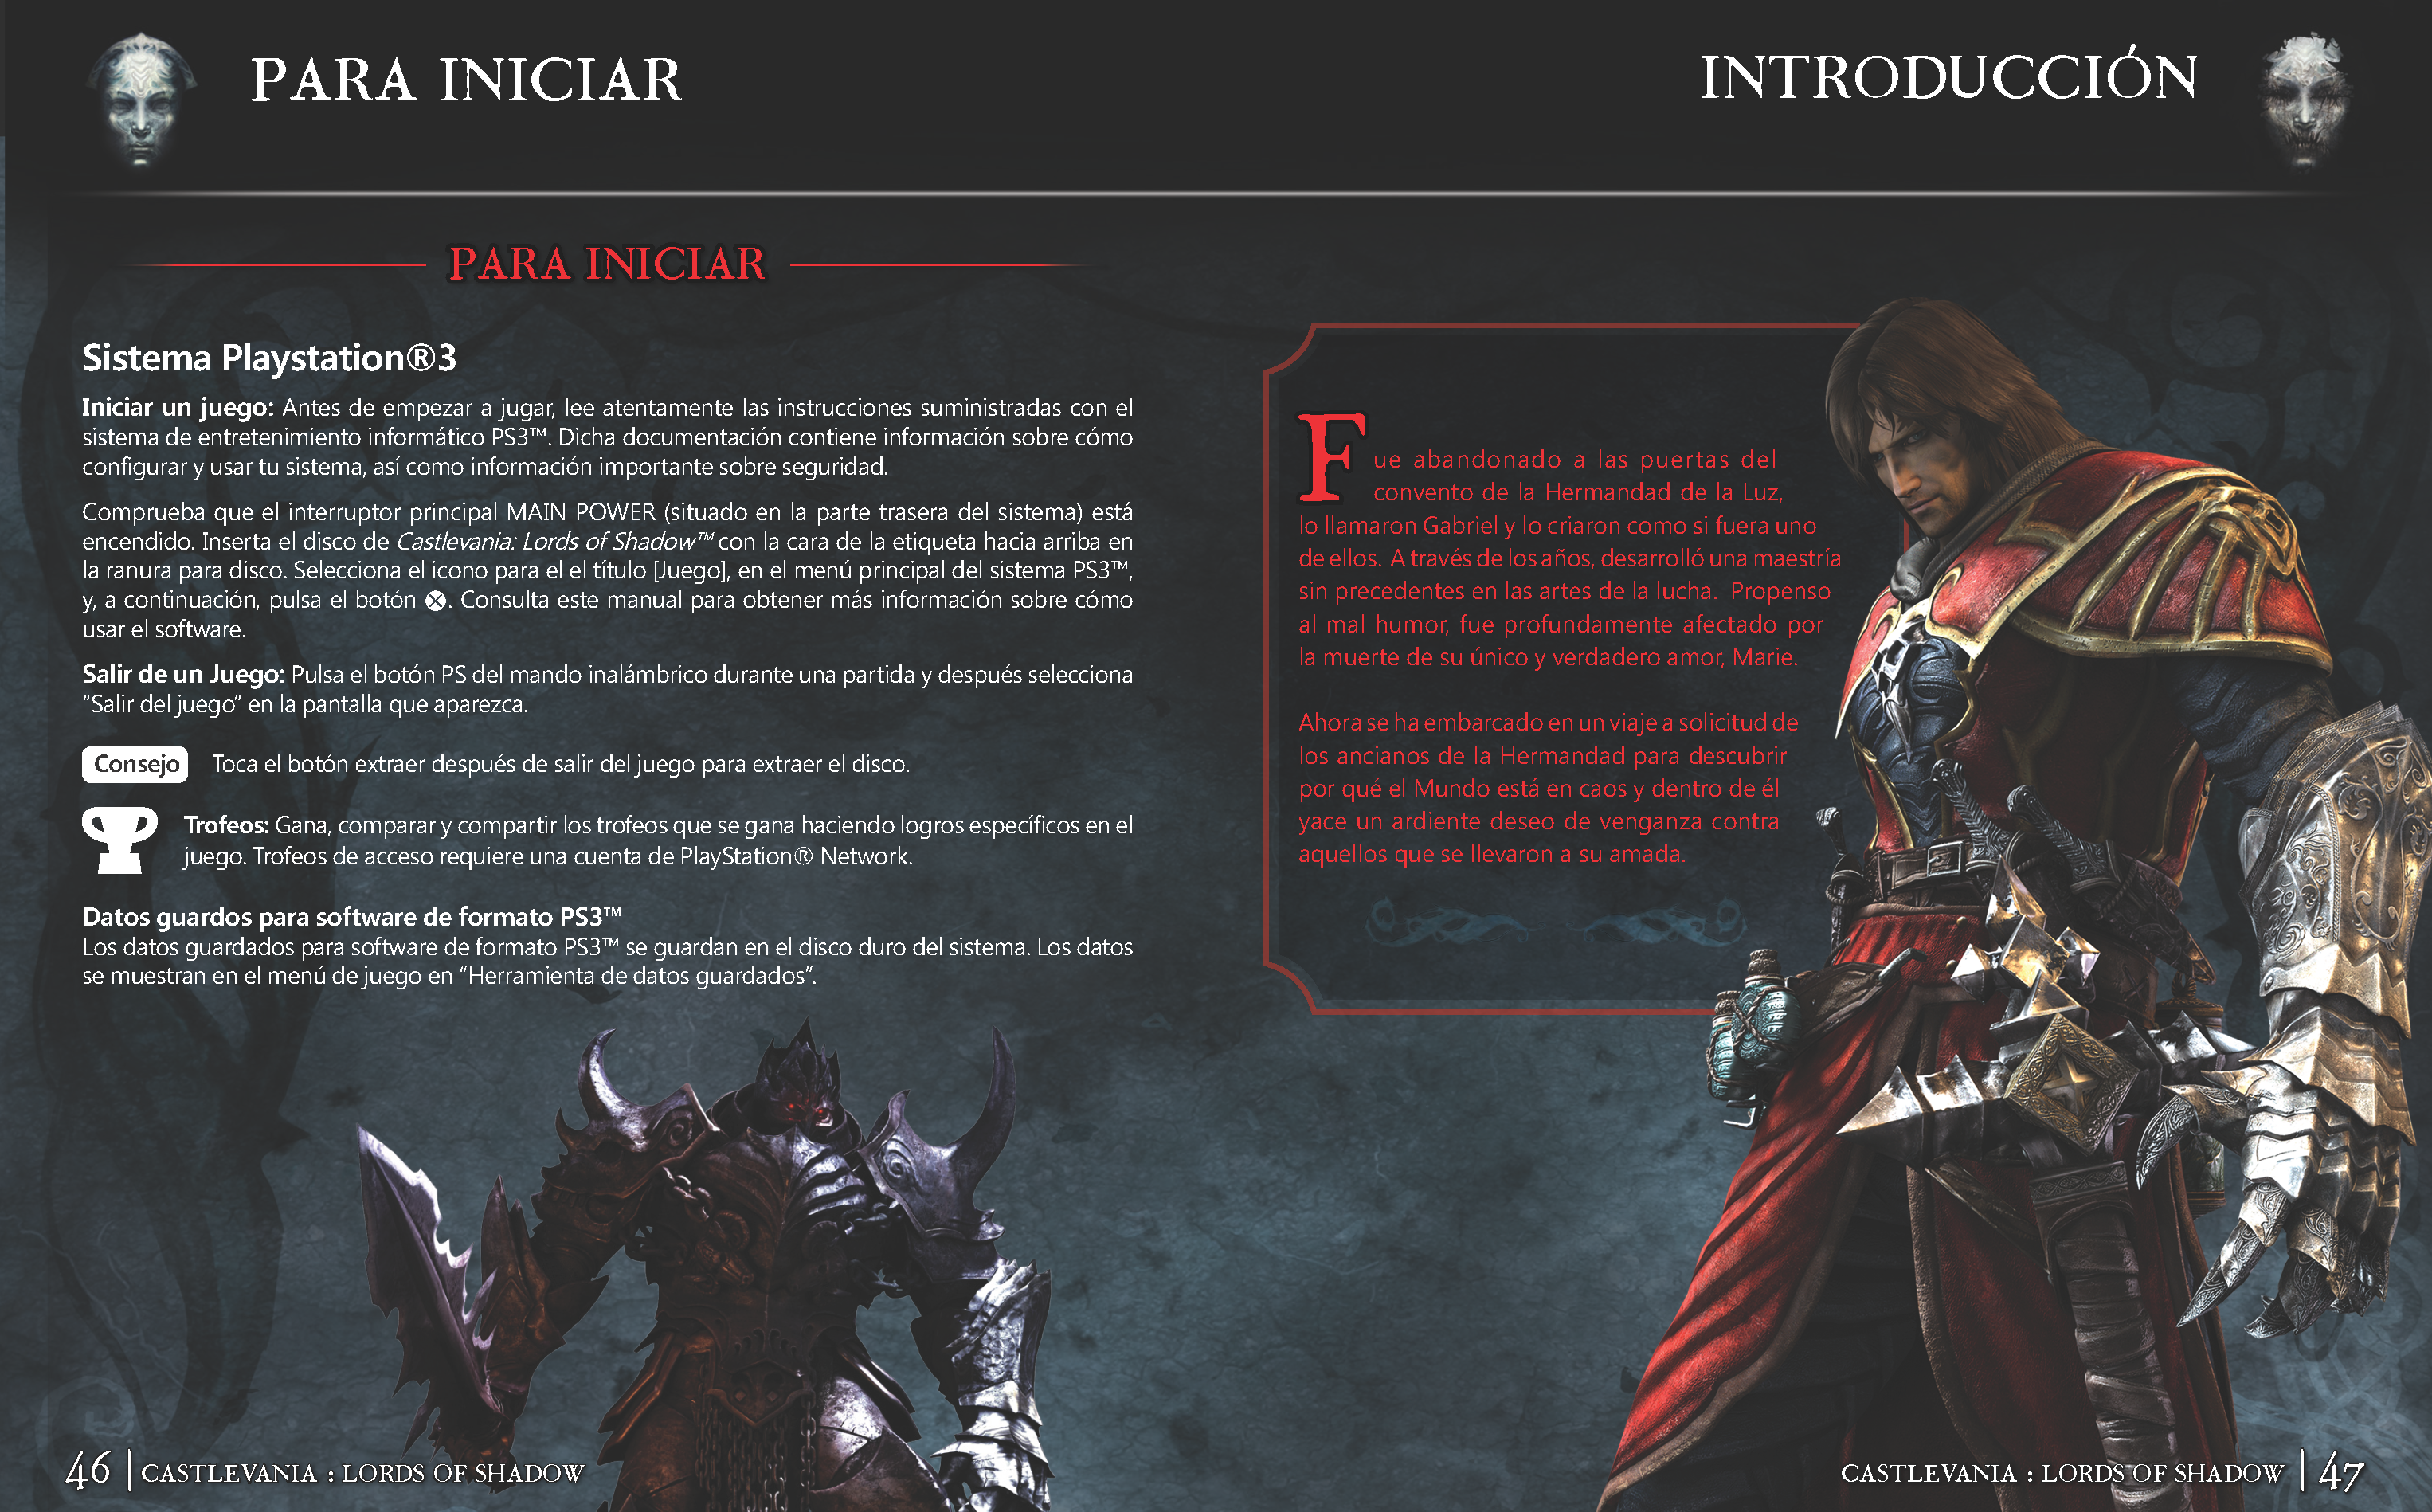 Castlevania: Lords of Shadow gem, scroll and upgrade guide